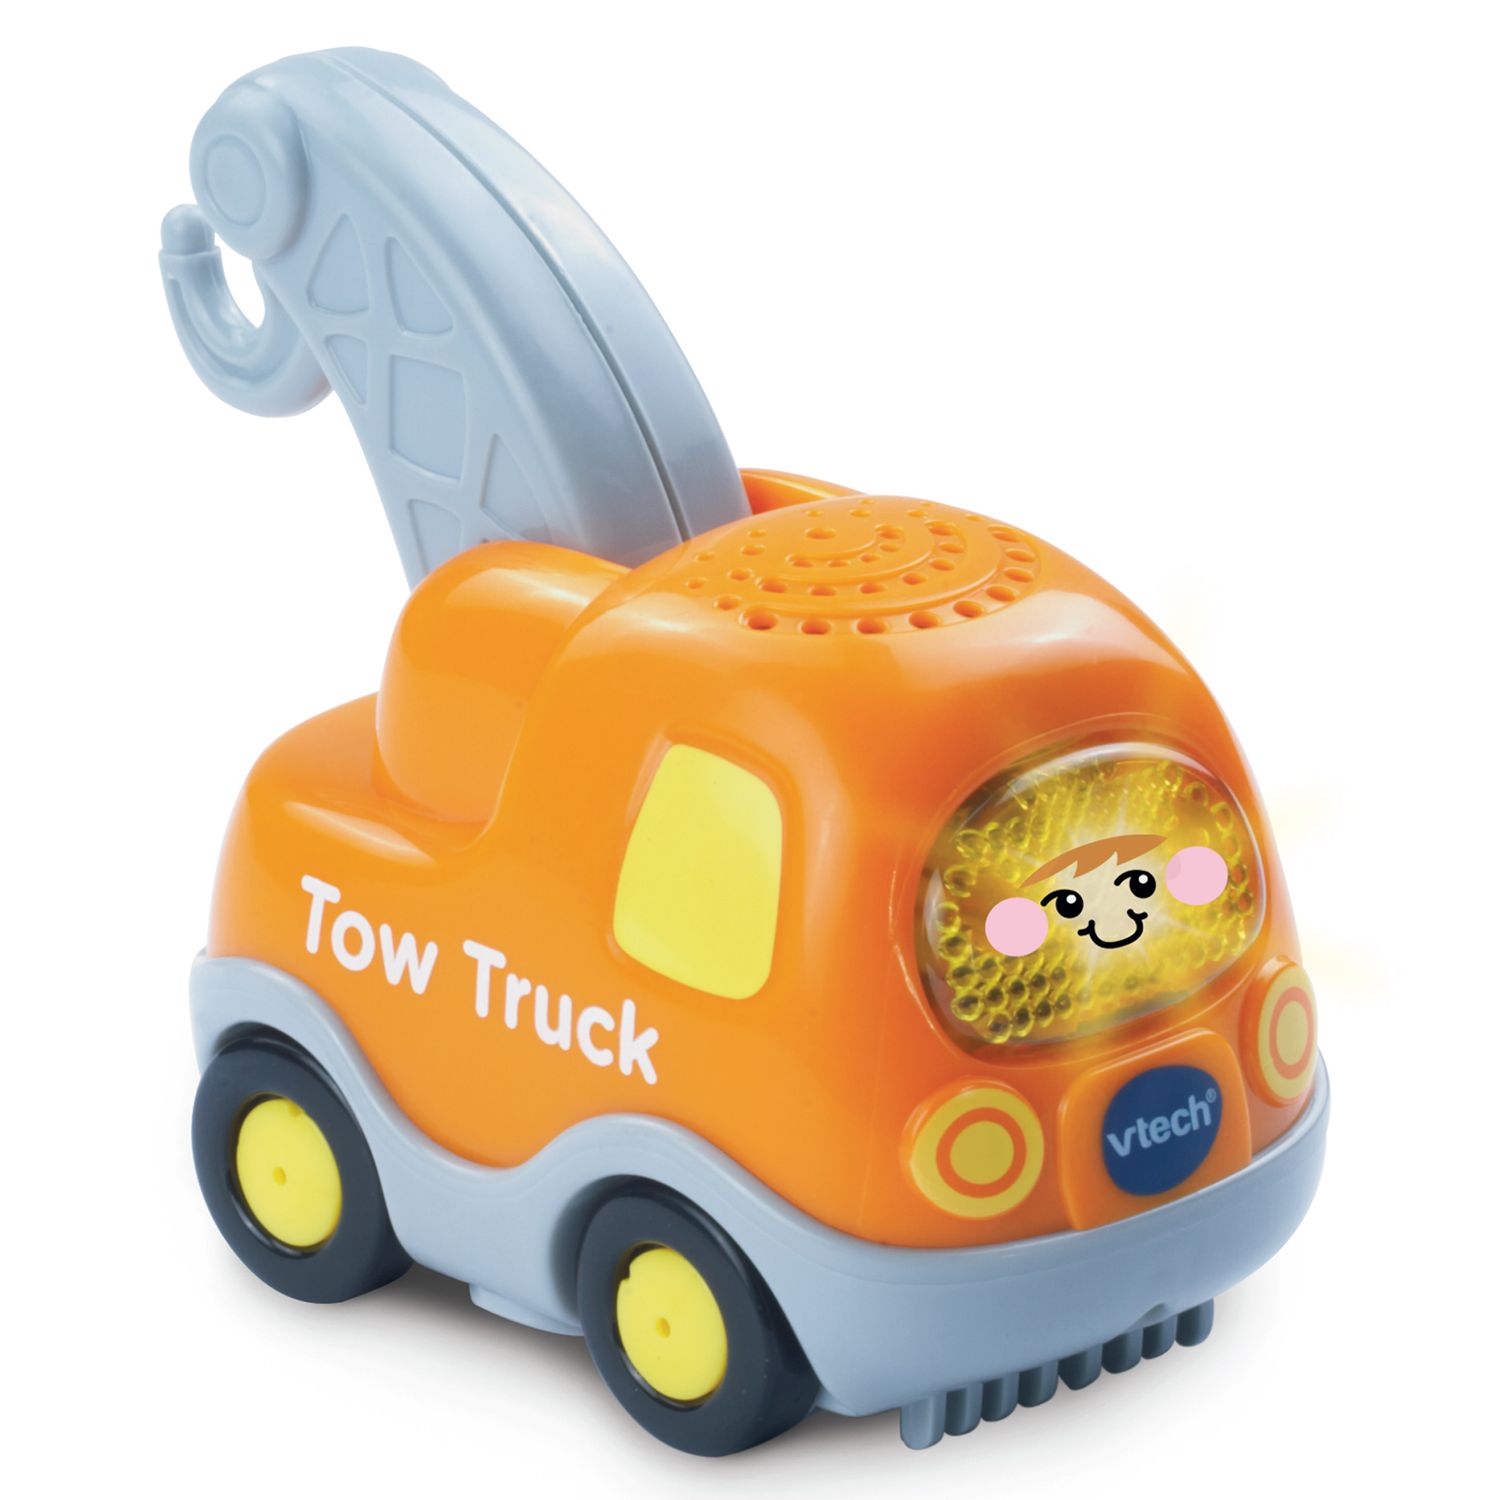 toot toot drivers tow truck